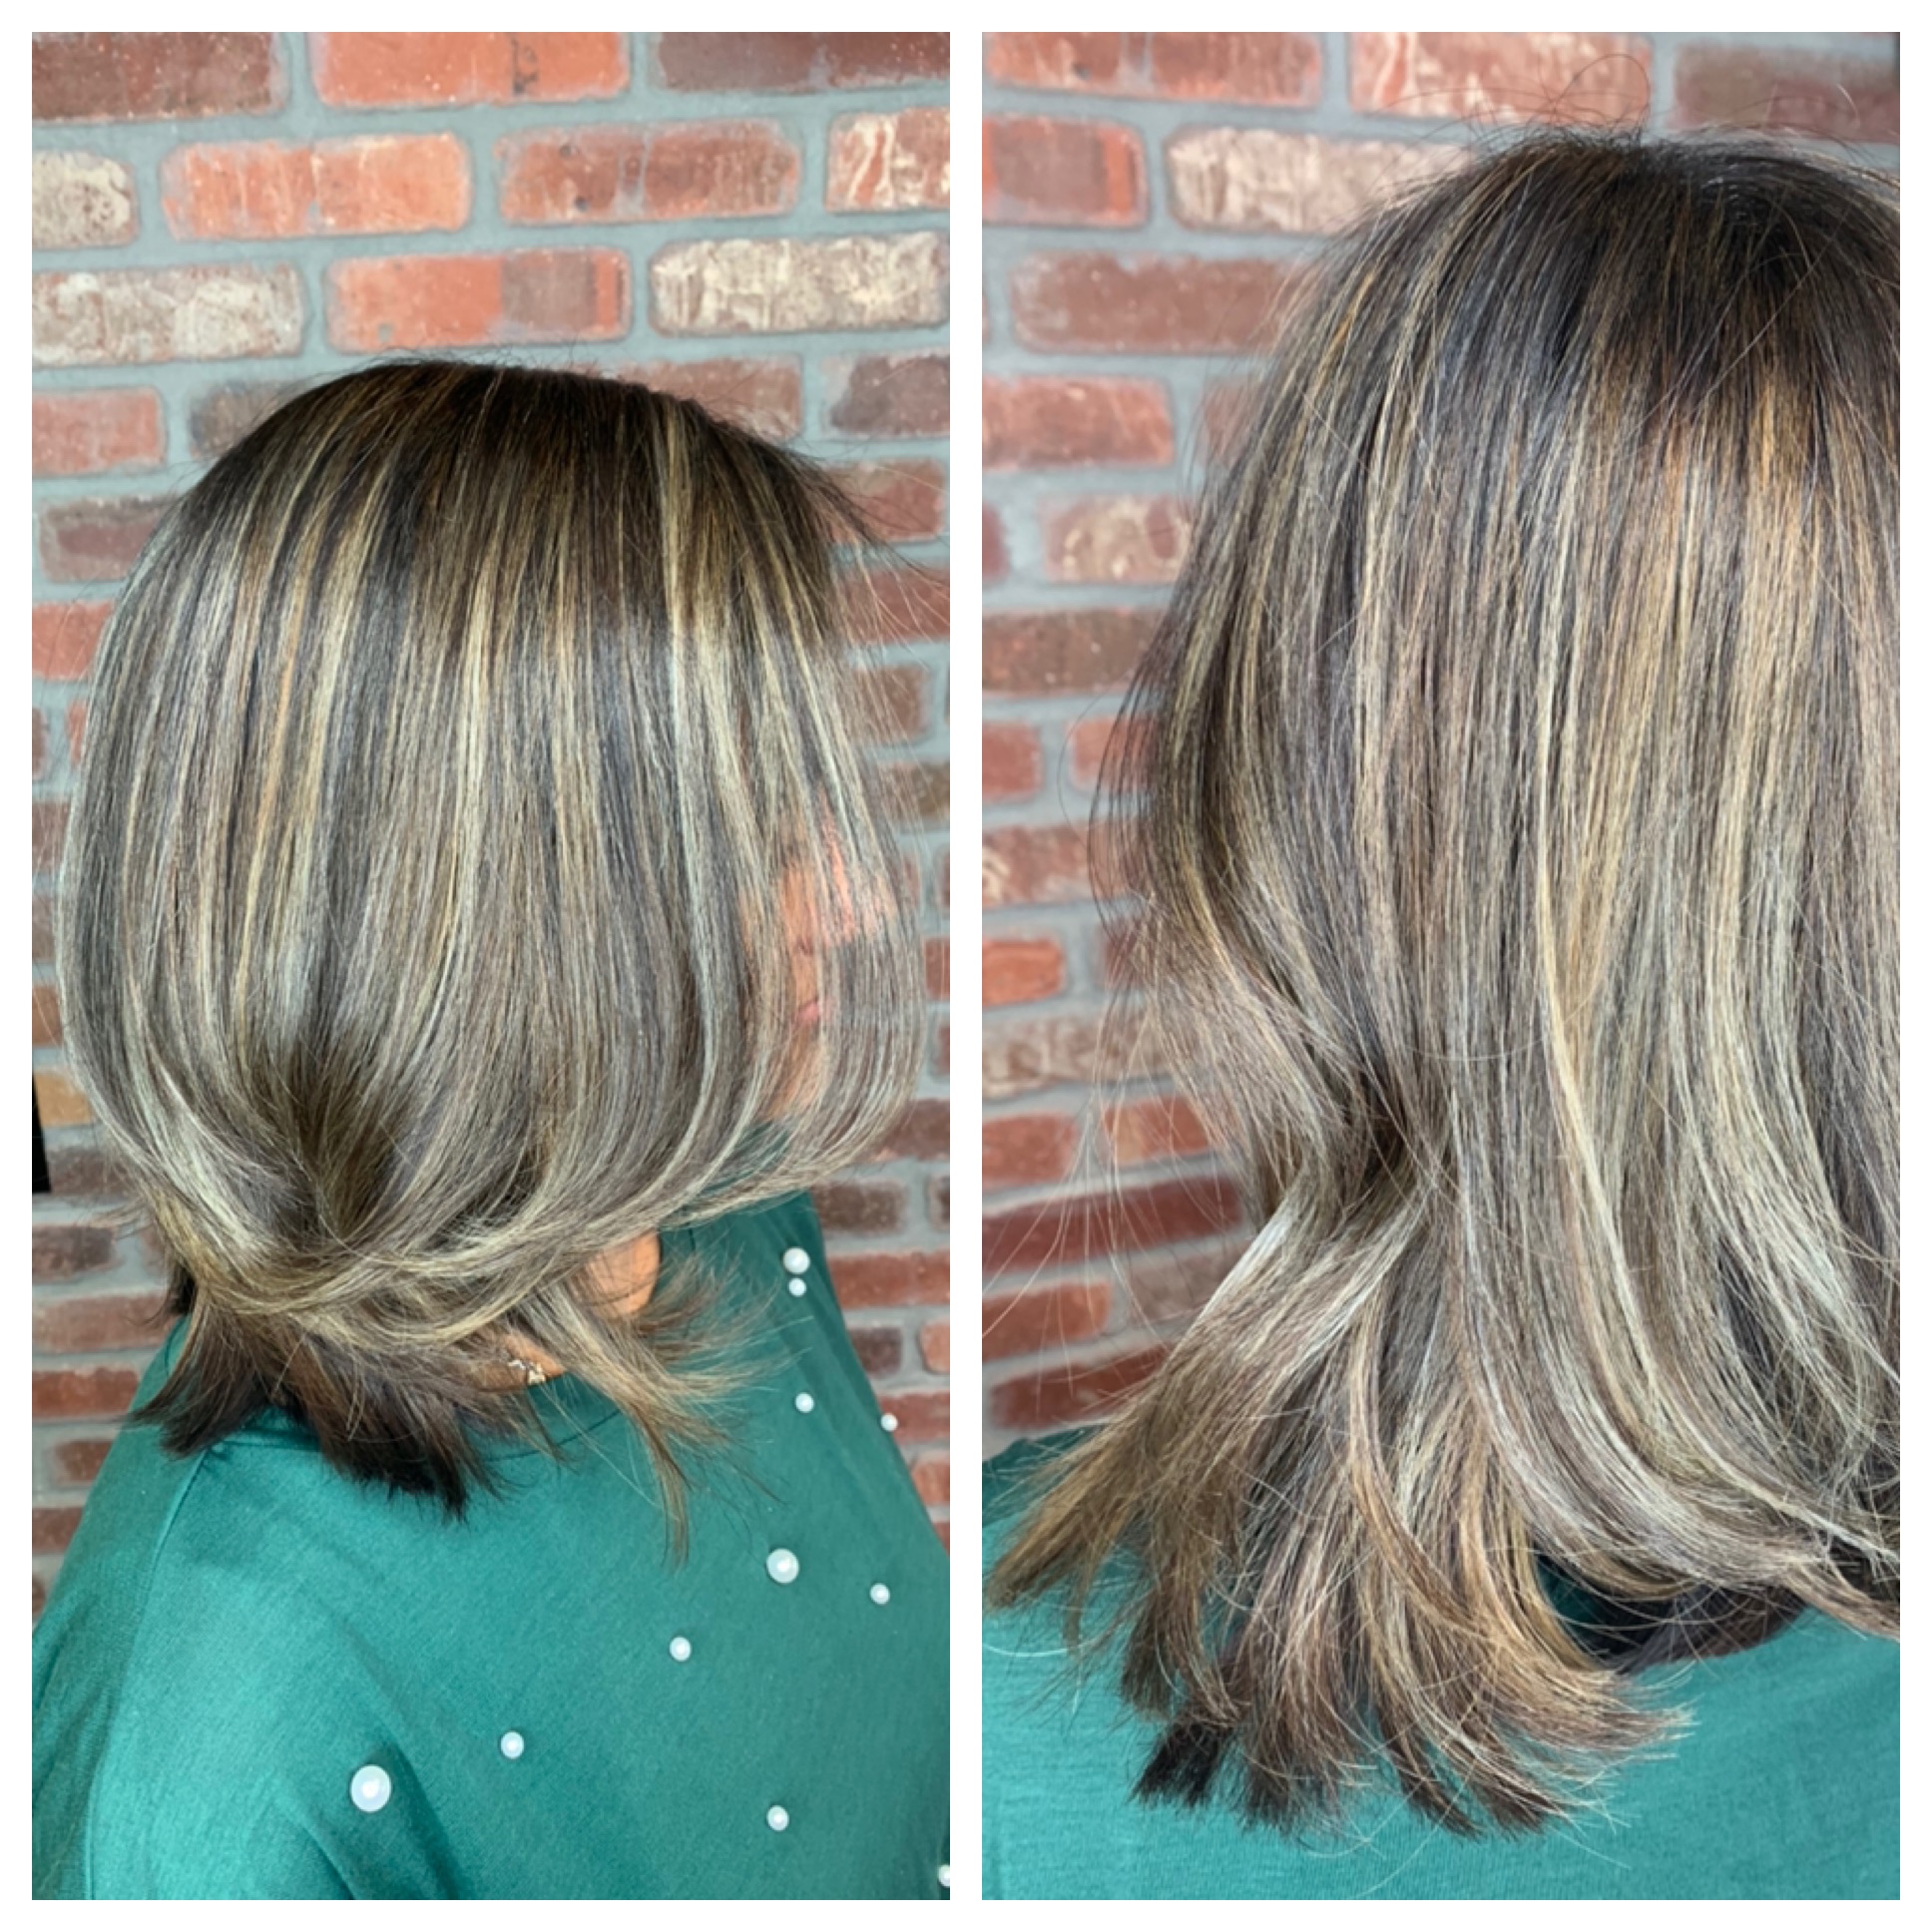 Highlights performed 2 times to get this light - from previously colored hair